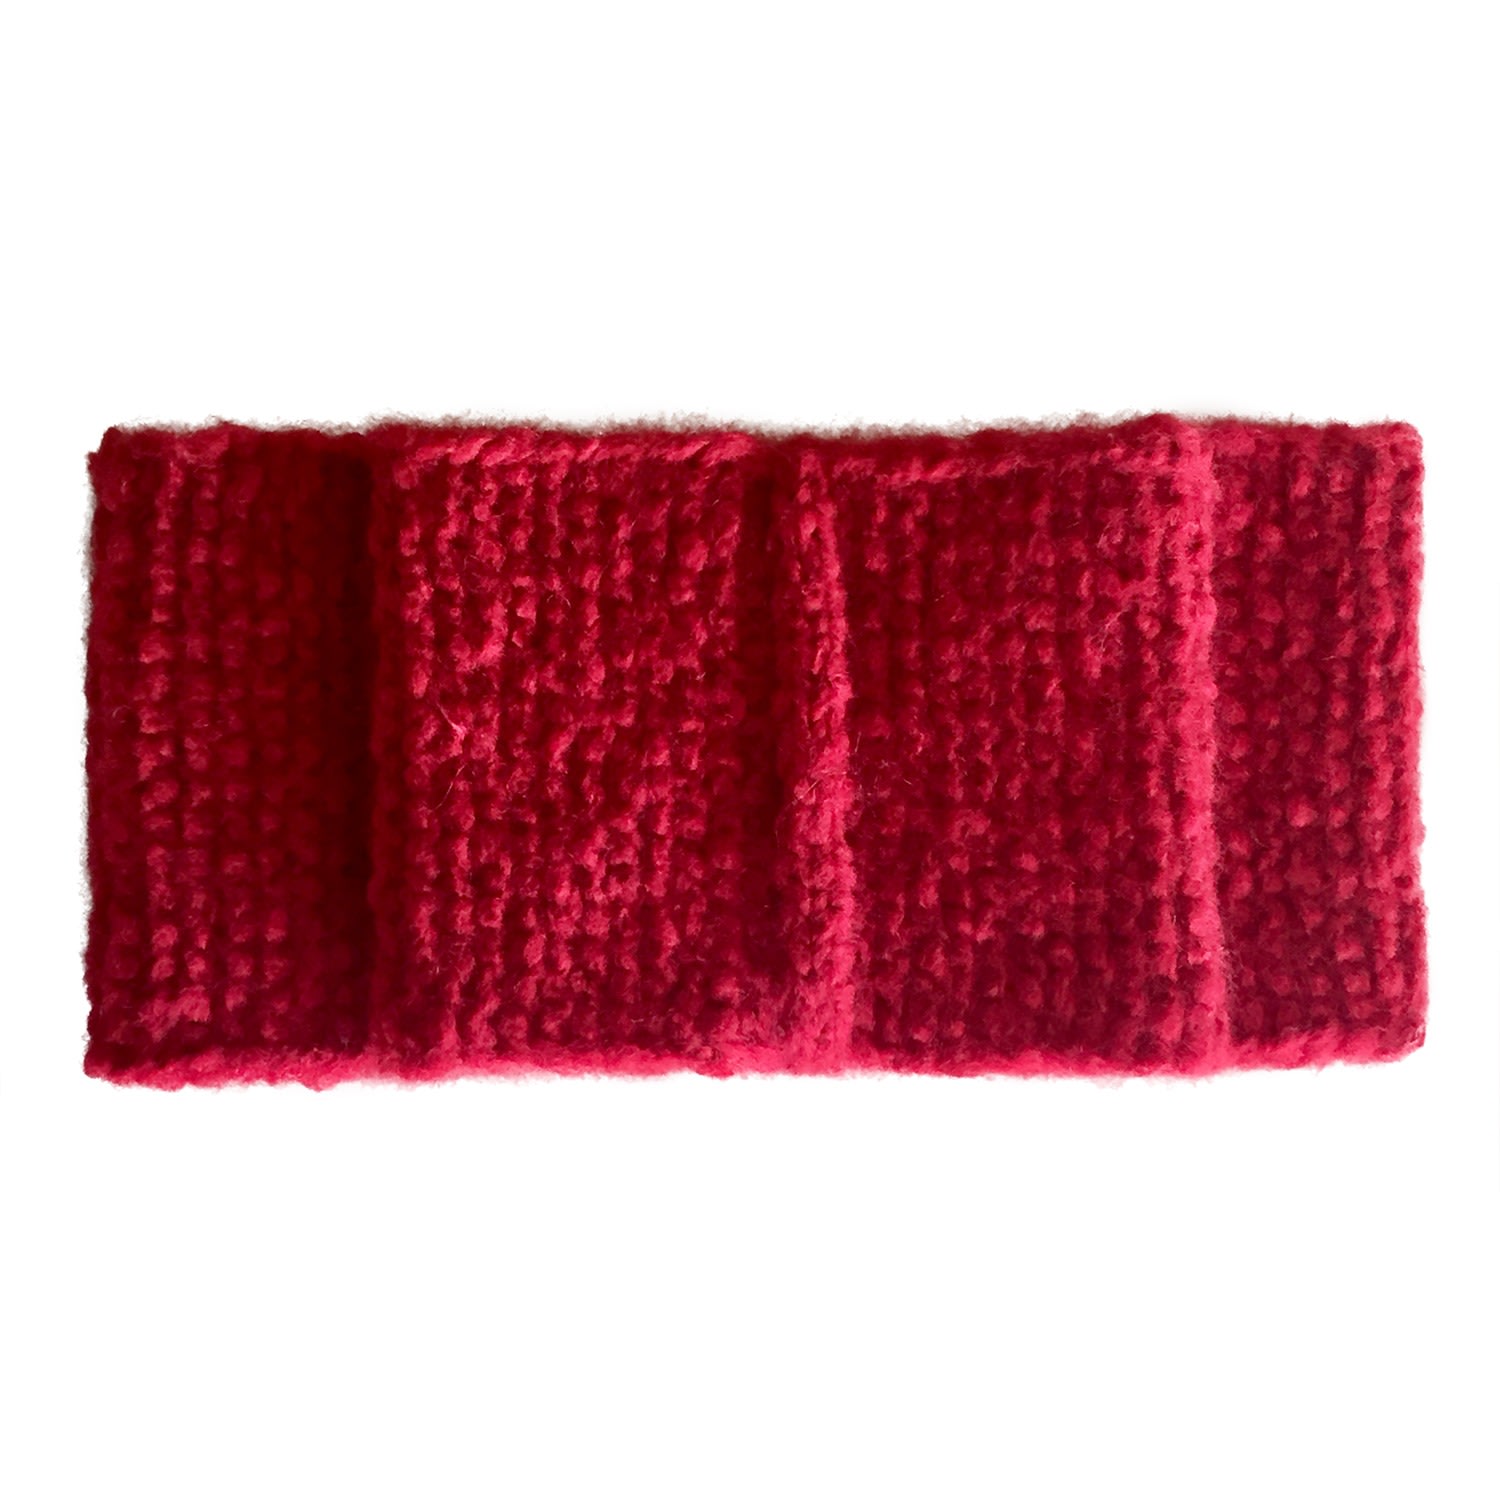 Women’s Paris Hand-Knitted Cashmere Diadem In Red Grace Cashmere Zurich